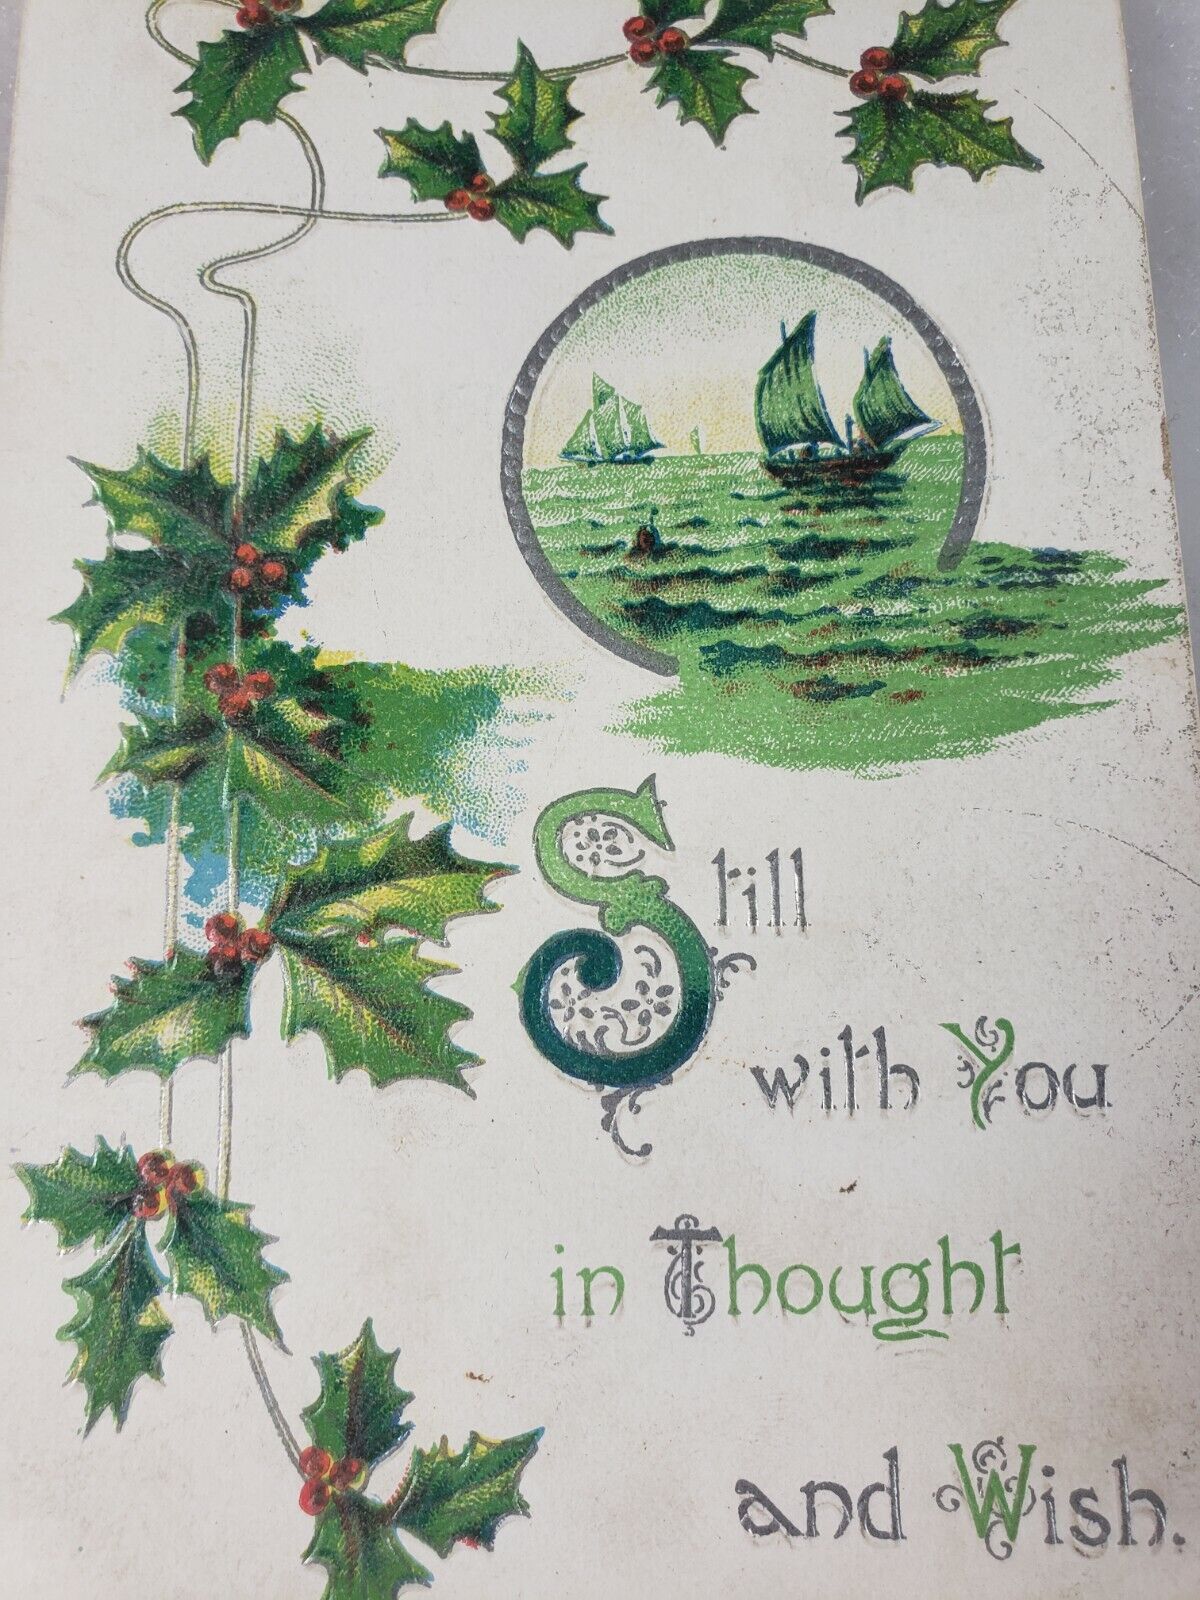 C 1907 Ship Ocean Vignette Holly Berries Still With You in Thought Wish Postcard